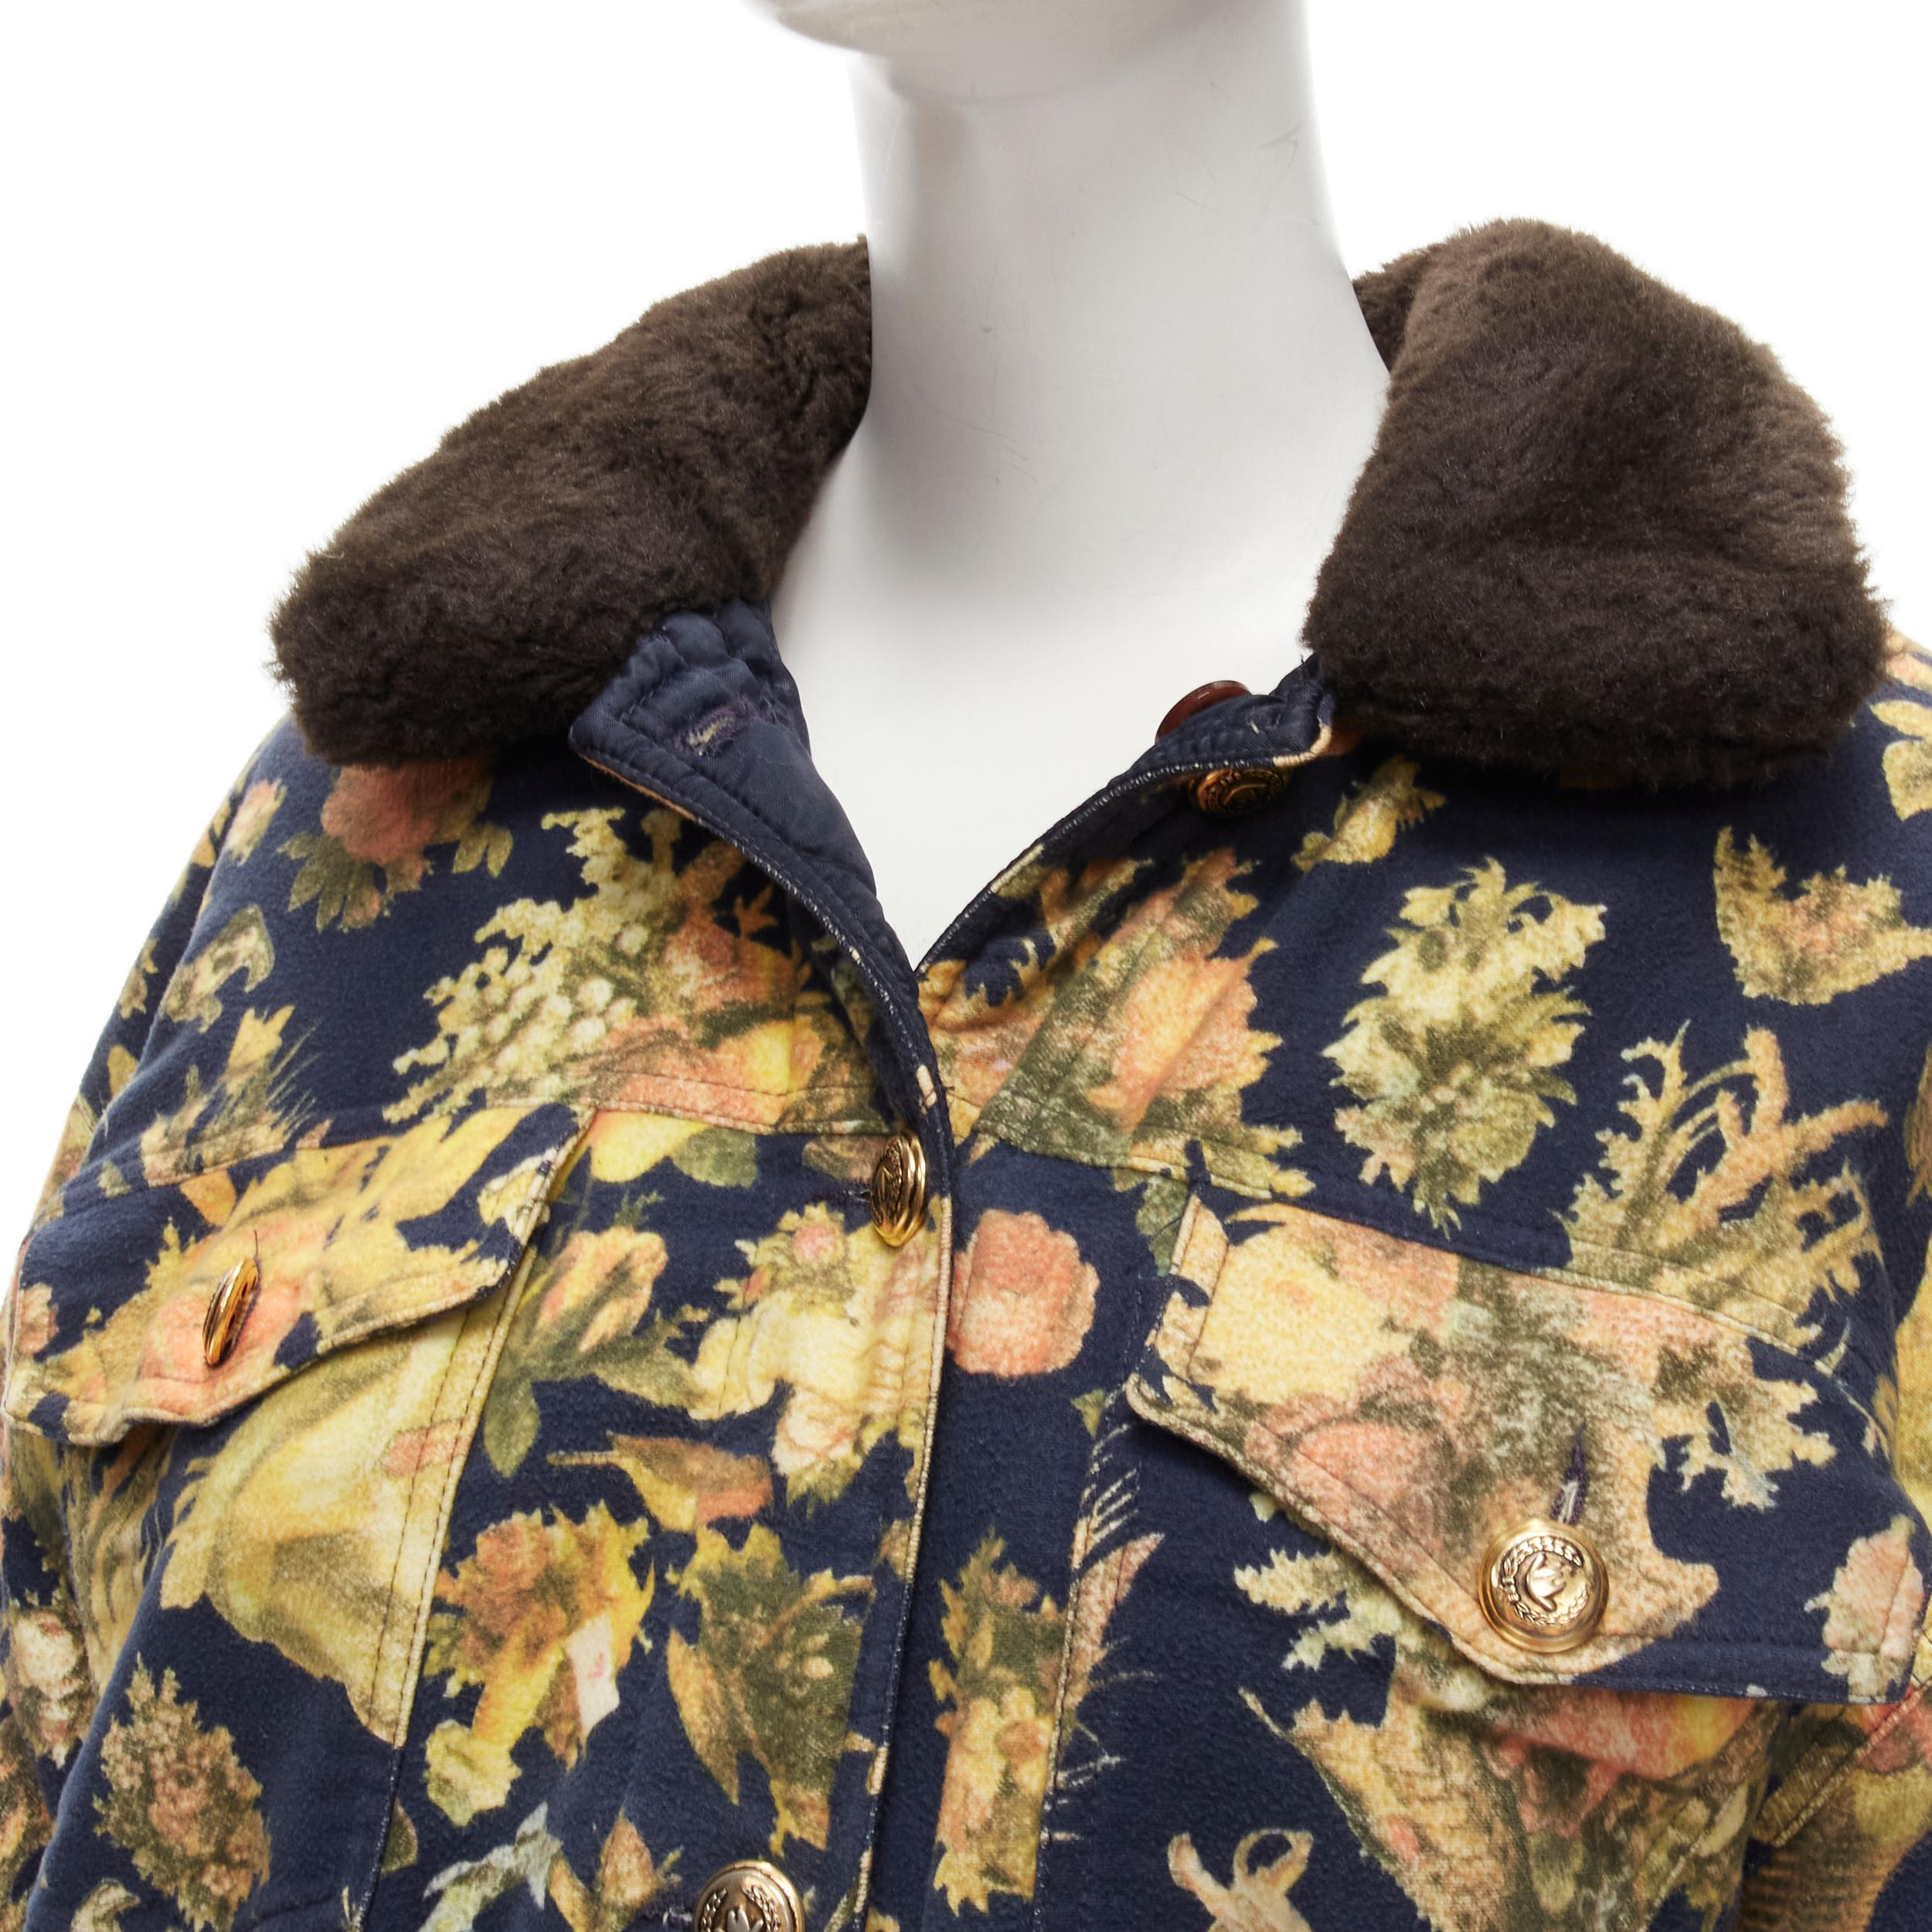 MOSCHINO JEANS Vintage yellow floral printed cotton faux fur trim padded coat
Reference: TGAS/C01675
Collection: Jeans Vintage label
Material: Cotton
Color: Yellow, Brown
Pattern: Floral
Closure: Button
Lining: Fabric
Extra Details: I LOVE YOU VERY